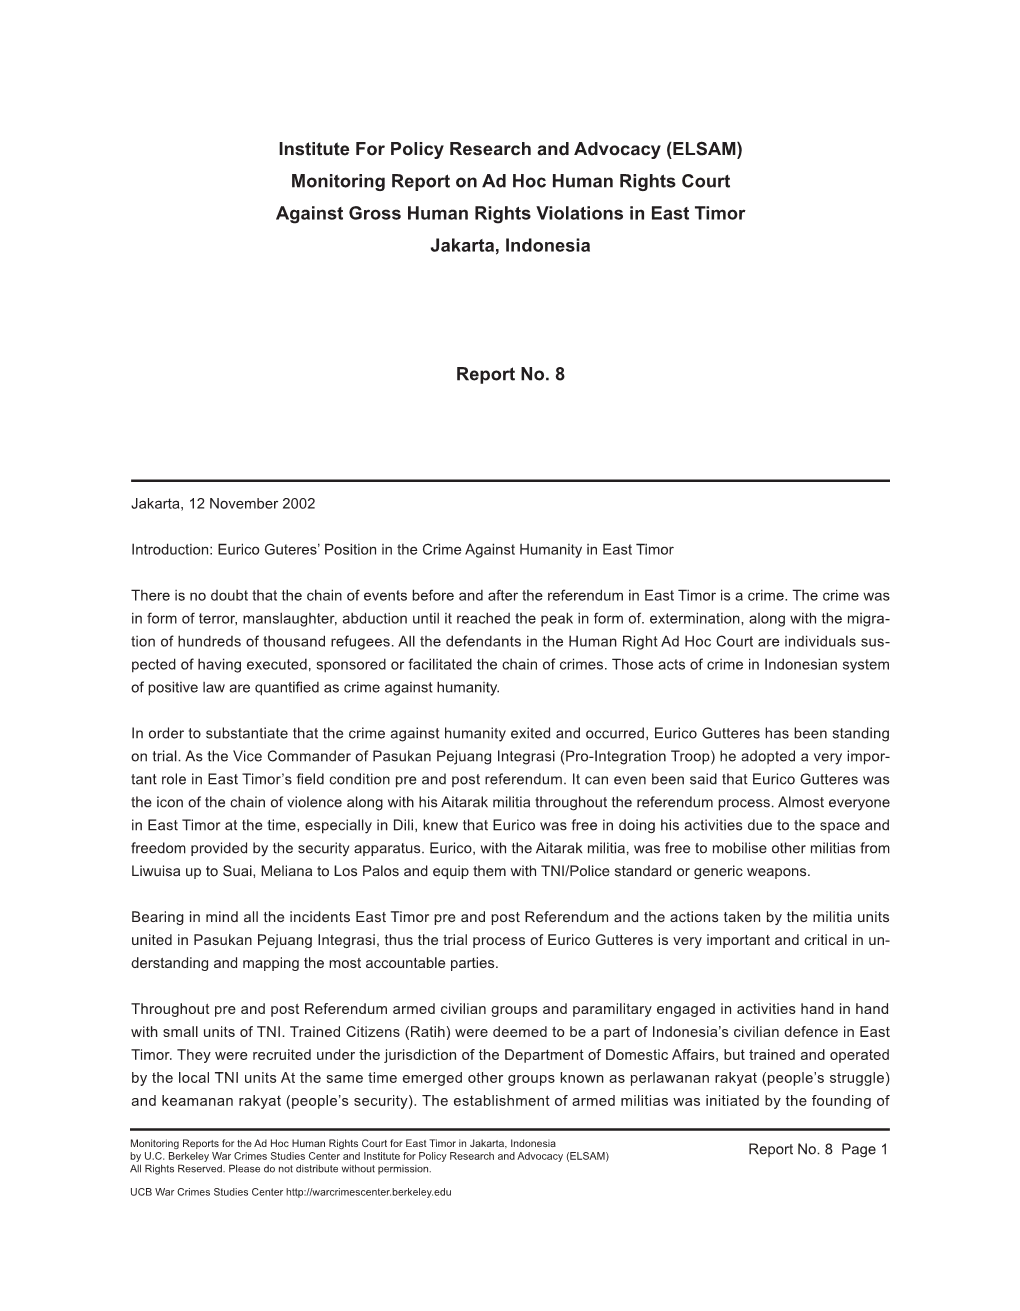 Ad Hoc Human Rights Court Trial Monitoring Report No. 8